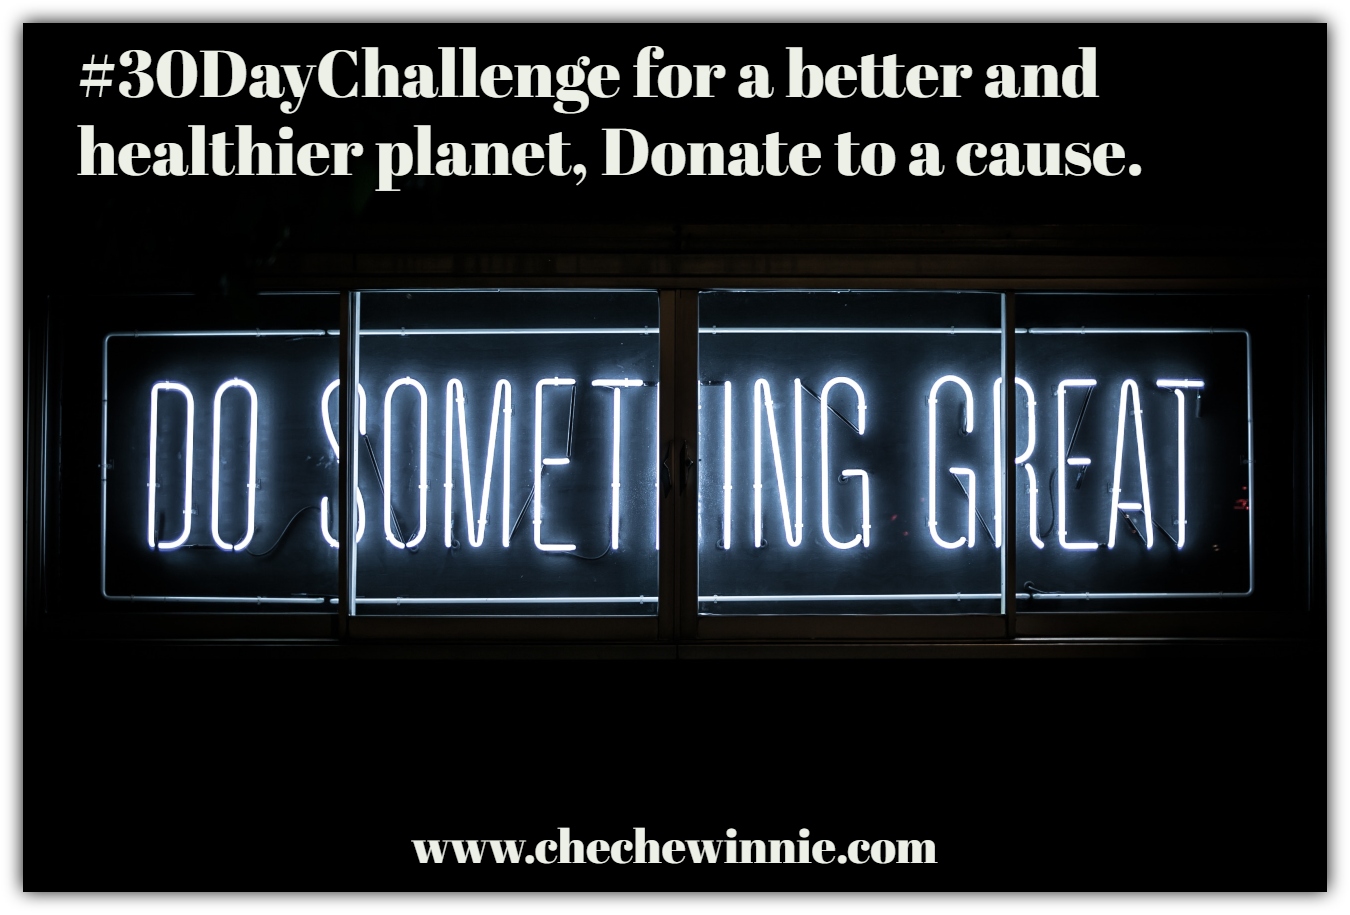 #30DayChallenge for a better and healthier planet, Donate to a cause.